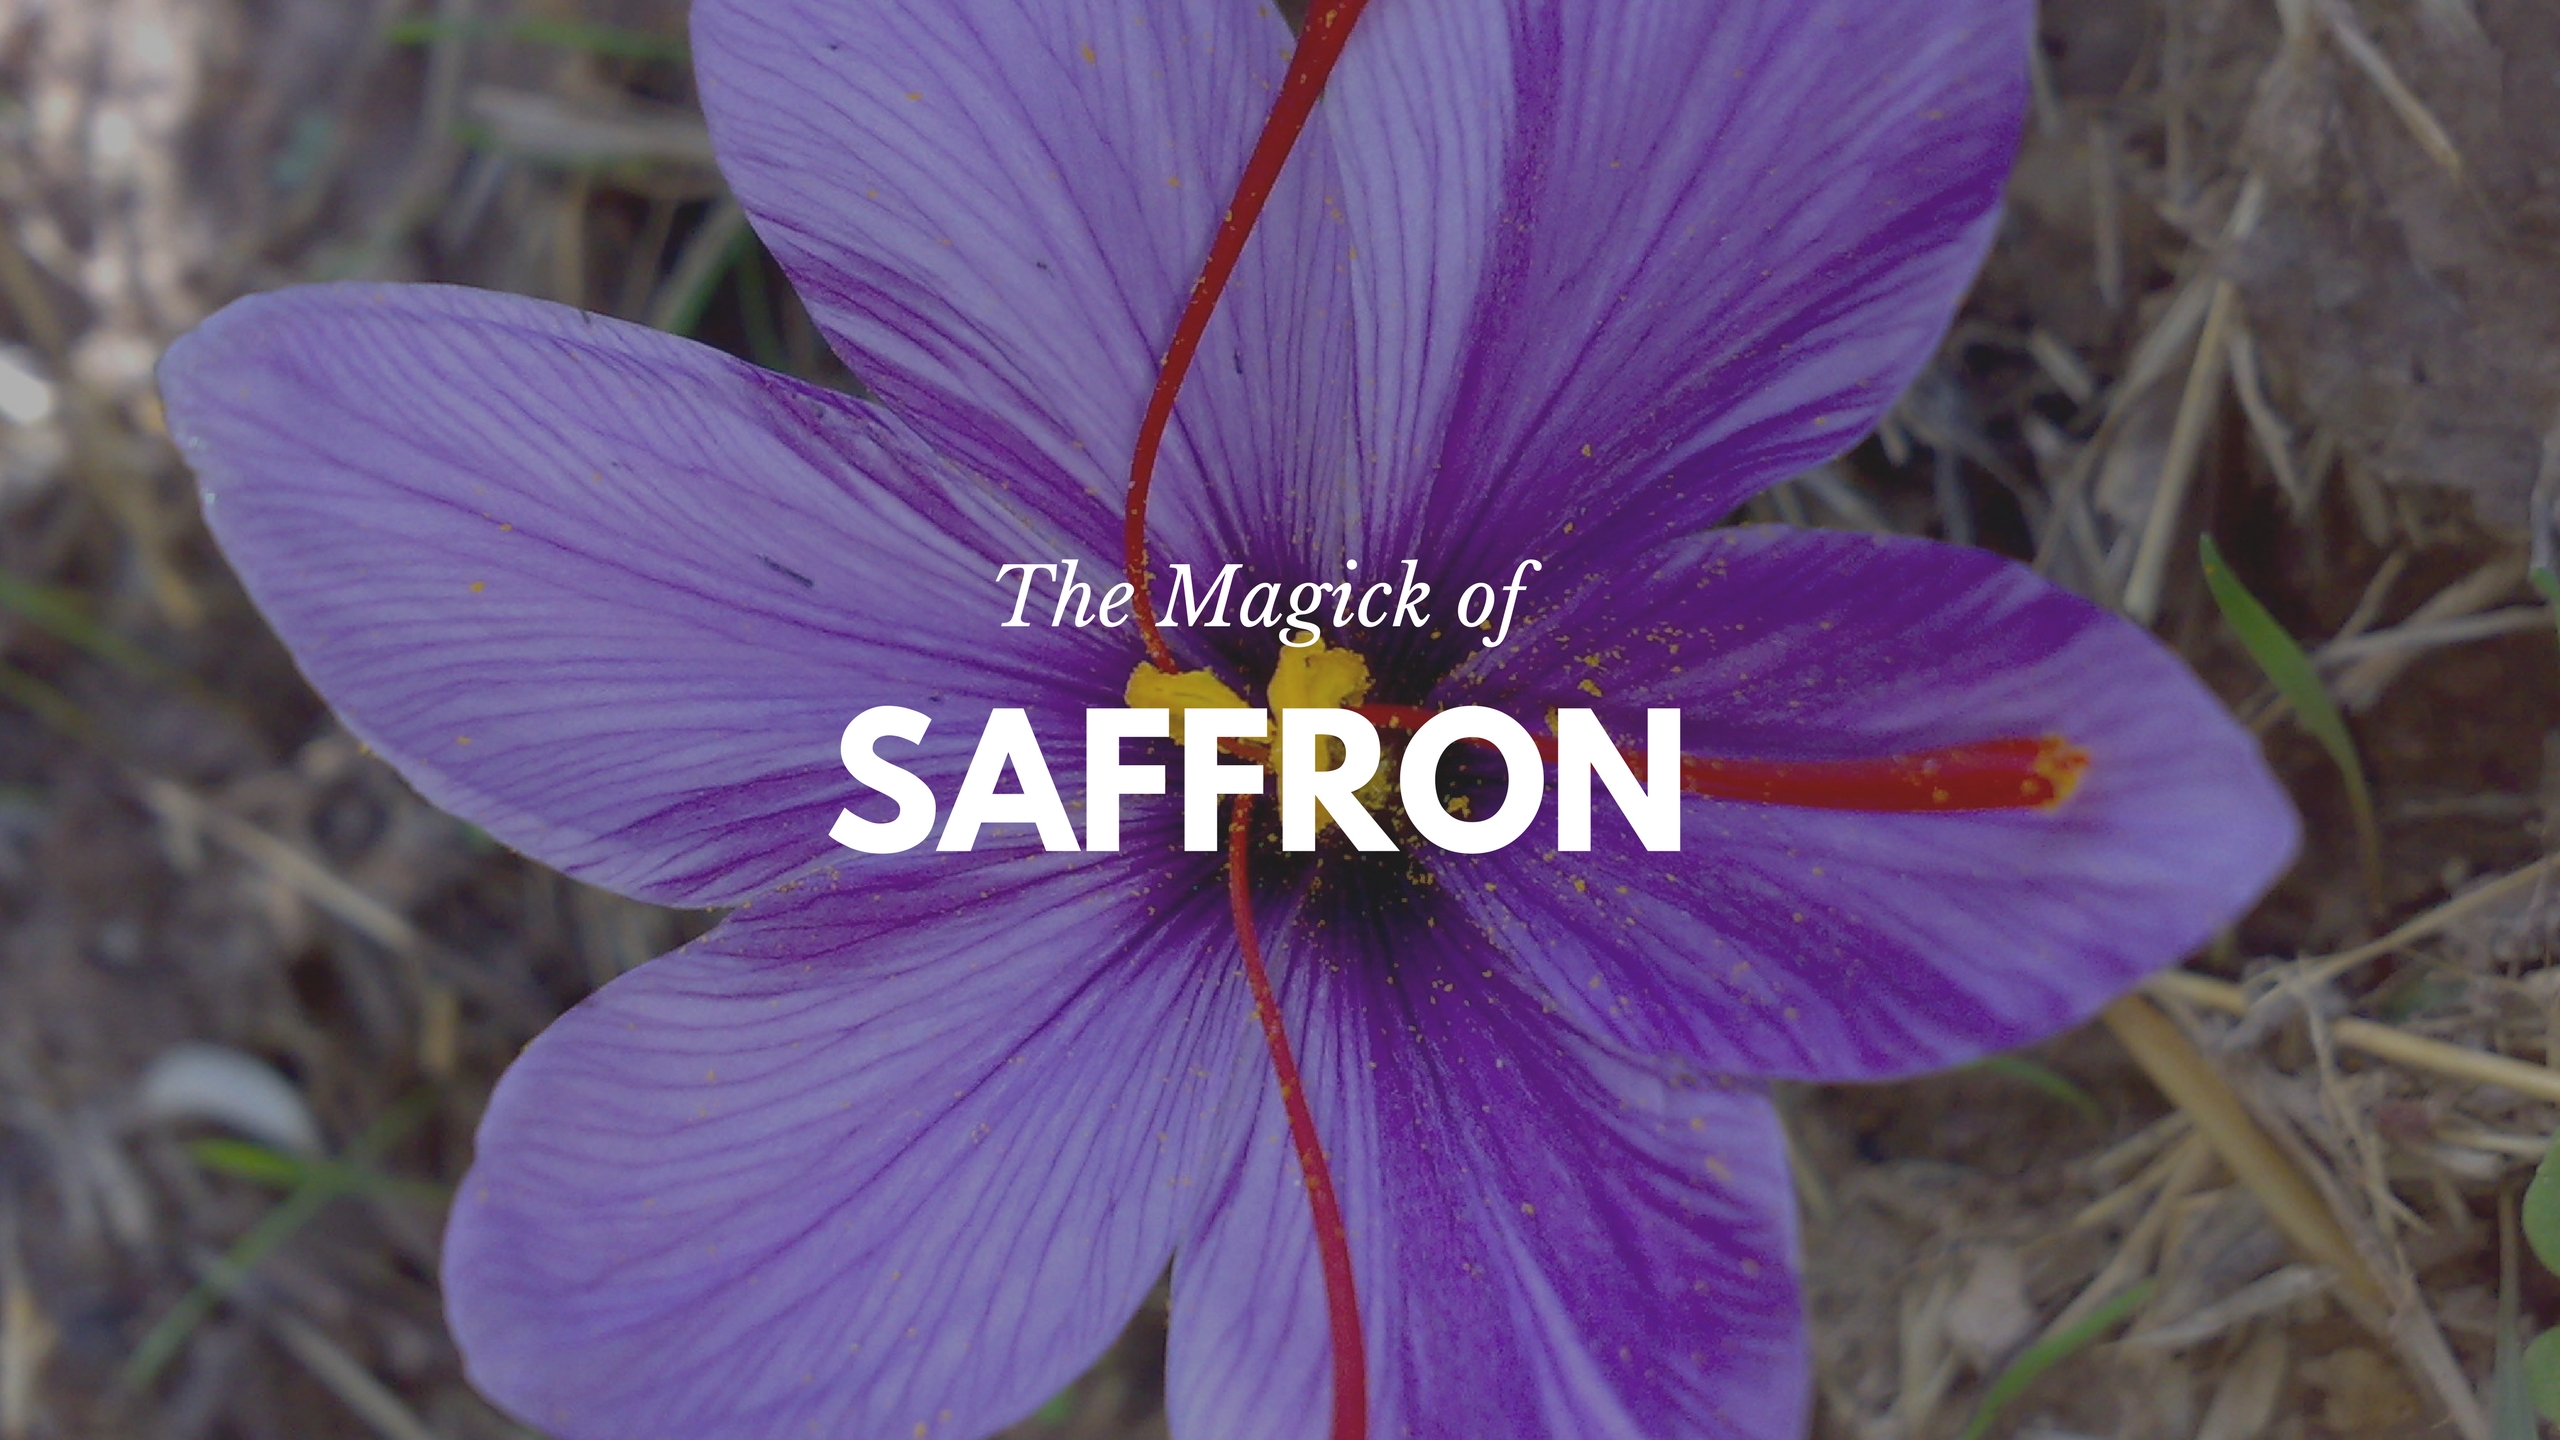 Saffron is irresistibly tantalizing drawing us in with its sultry, provoking aroma and passionate, seductive energy. -- Saffron Magical Properties and Uses